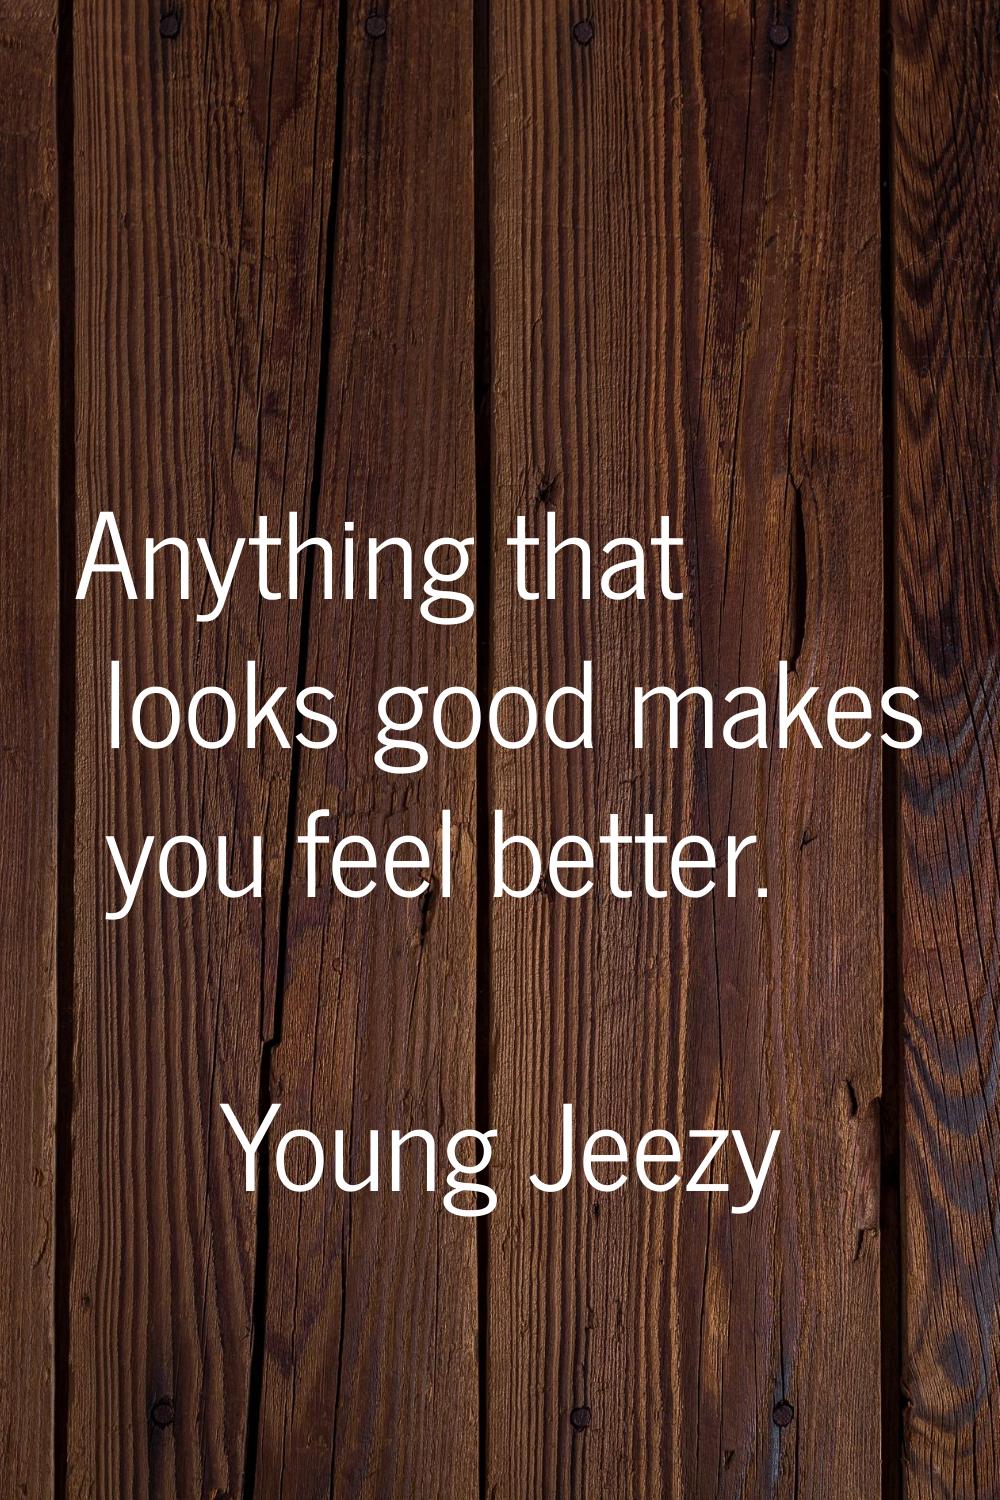 Anything that looks good makes you feel better.